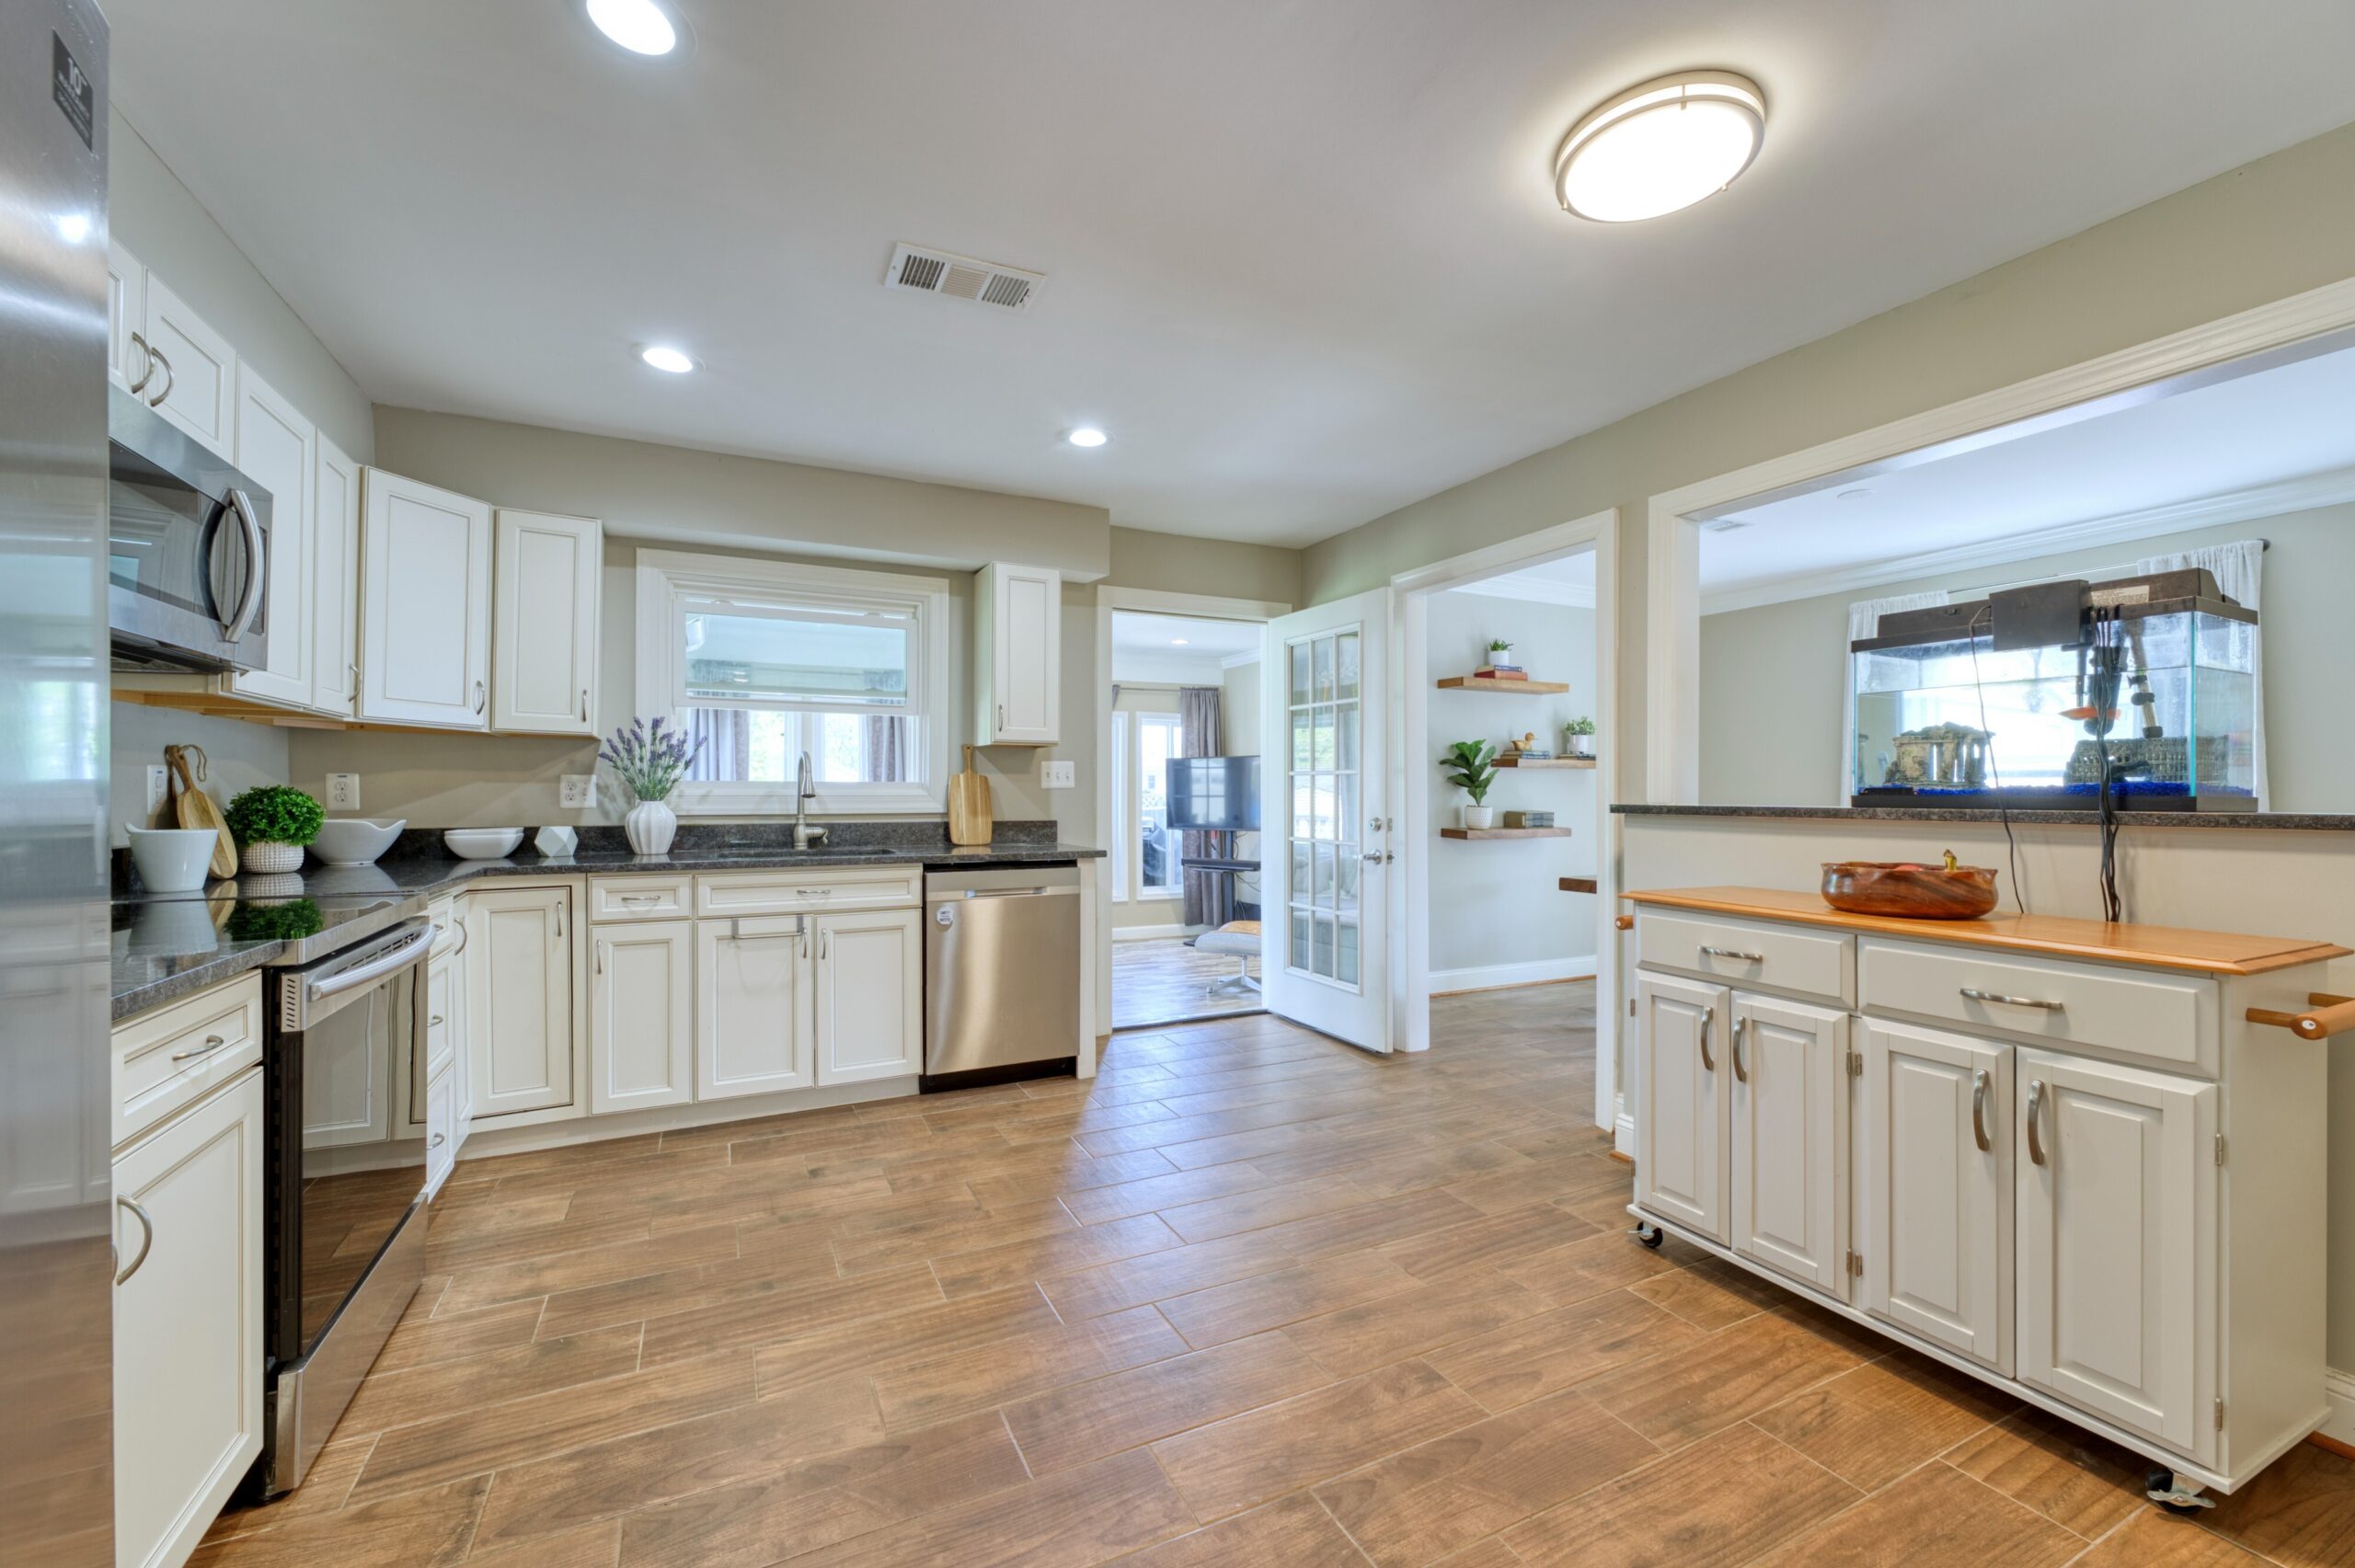 professional interior photo of 102 S Harrison Road, Sterling, VA - showing the remodeled kitchen with new white cabinets, stainless appliances and dark granite counters